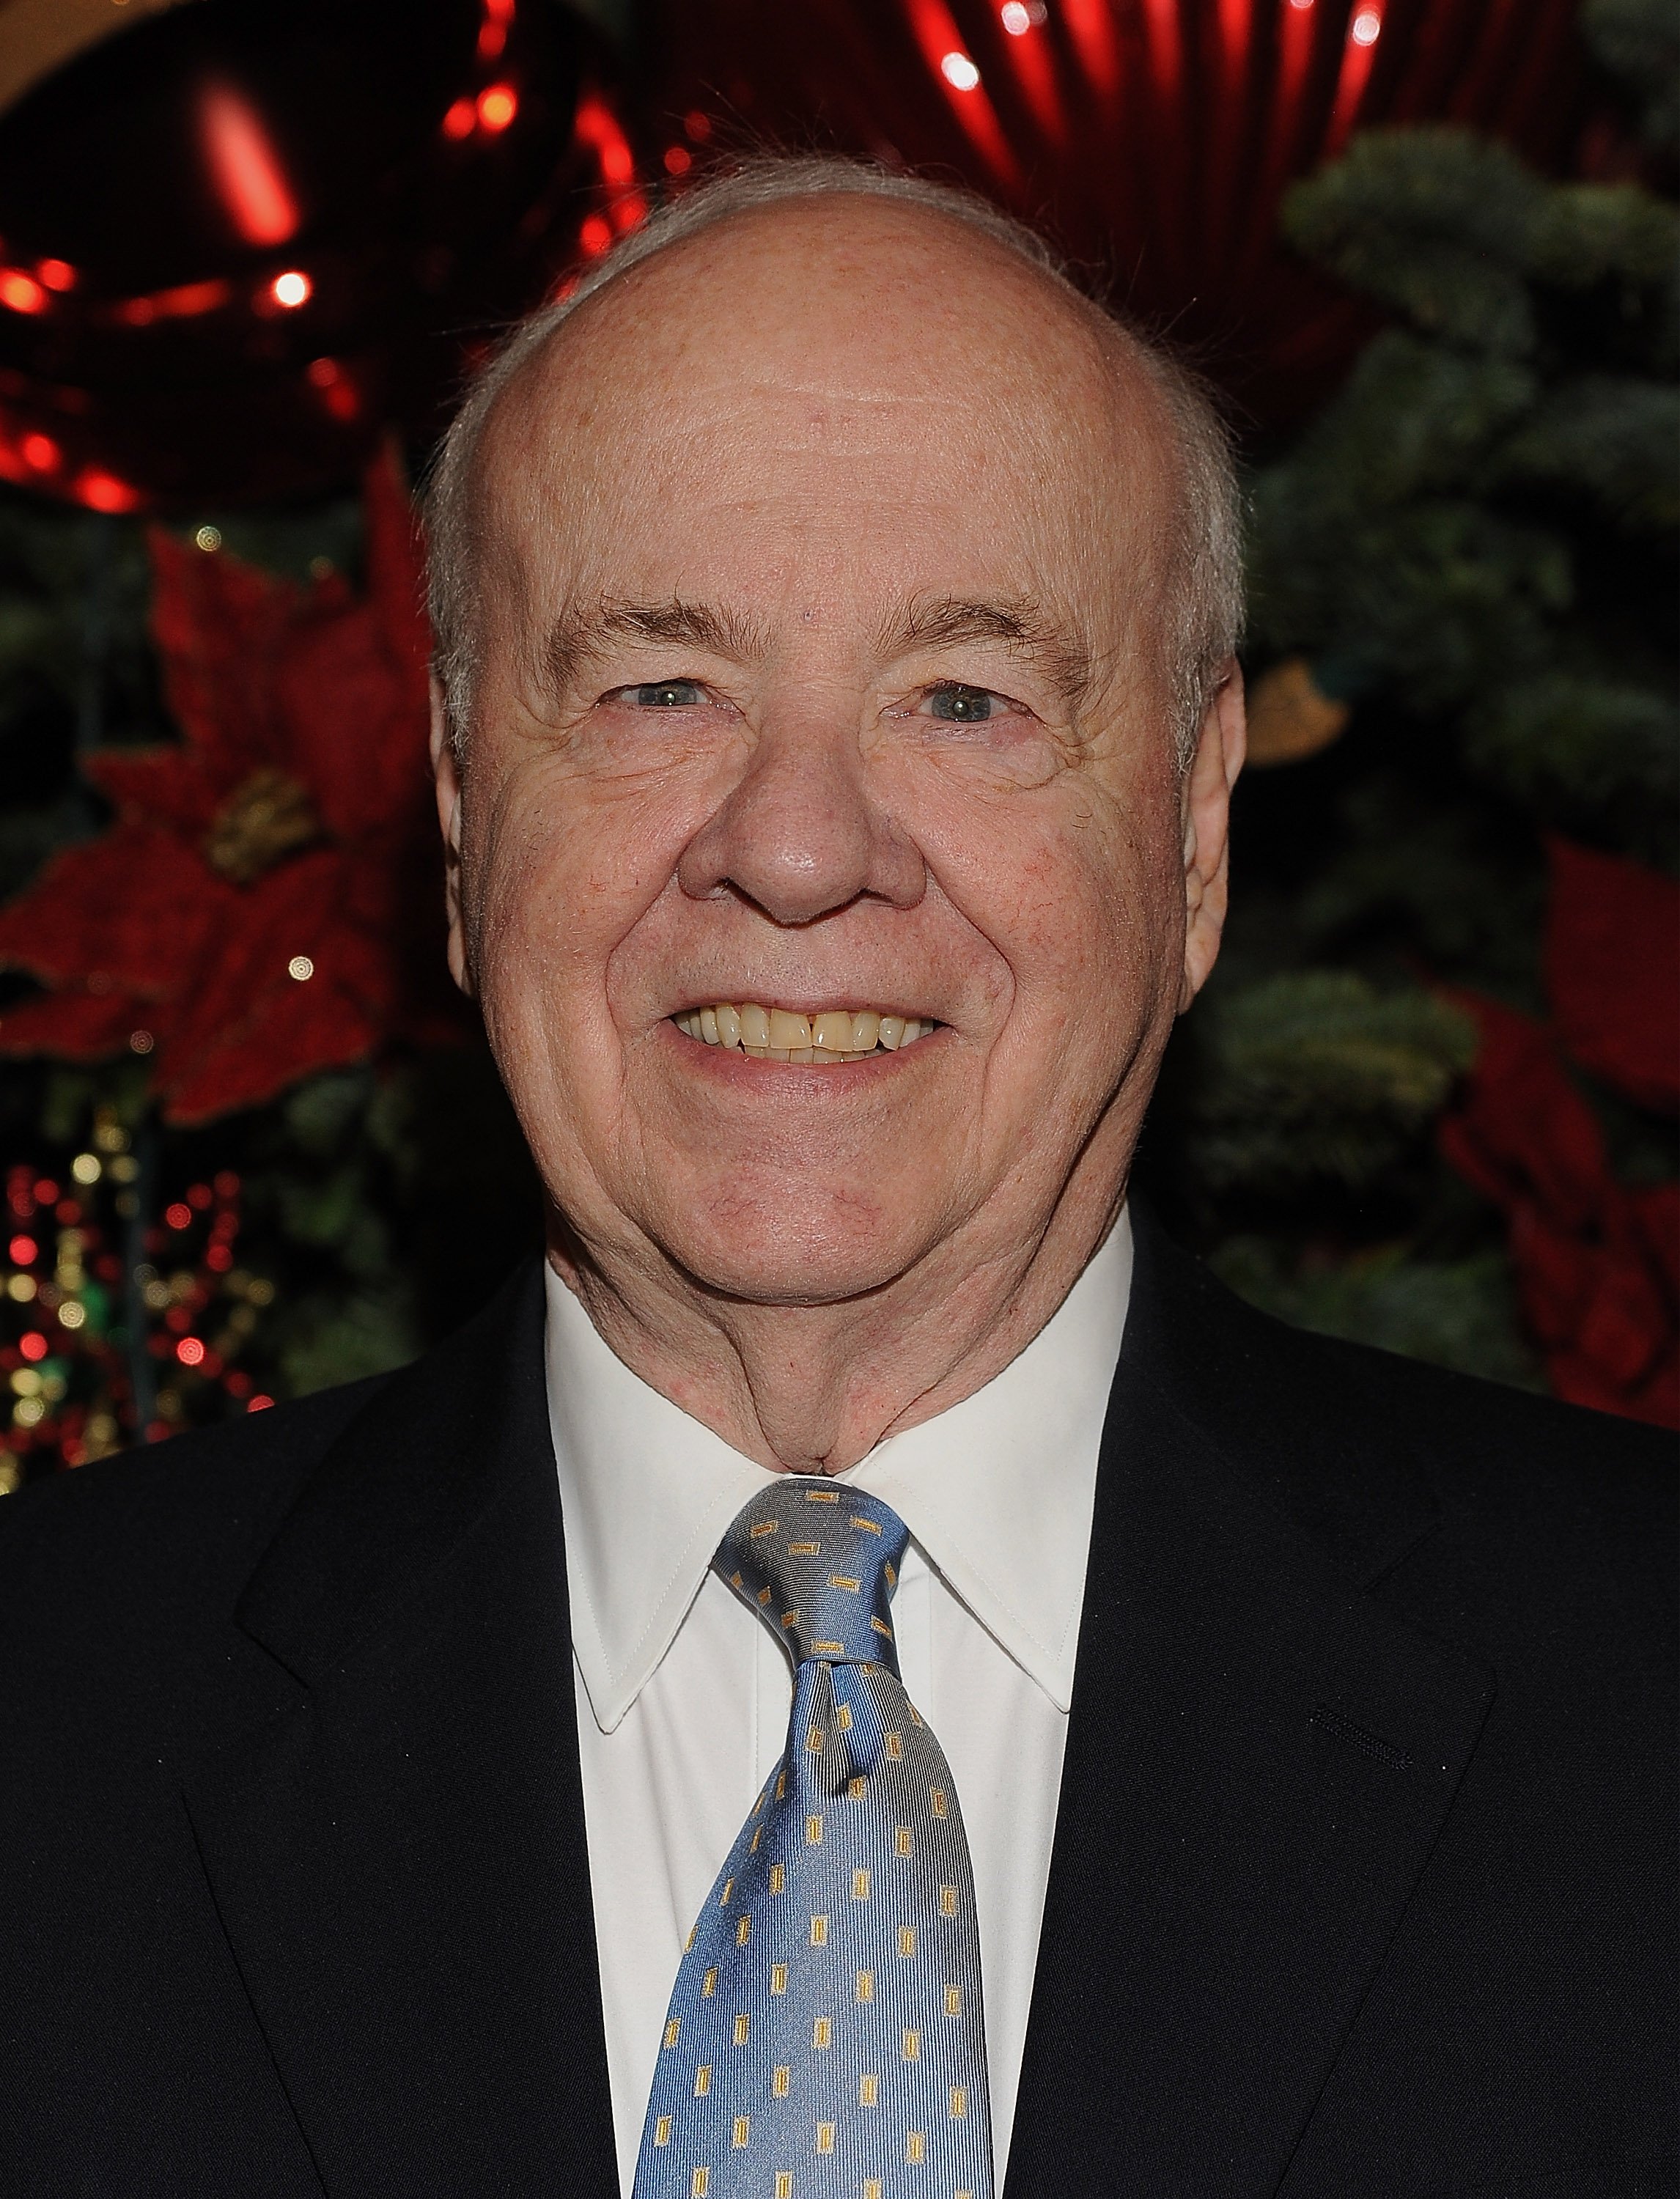 Tim Conway en Beverly Hills, California. | Fuente: Getty Images